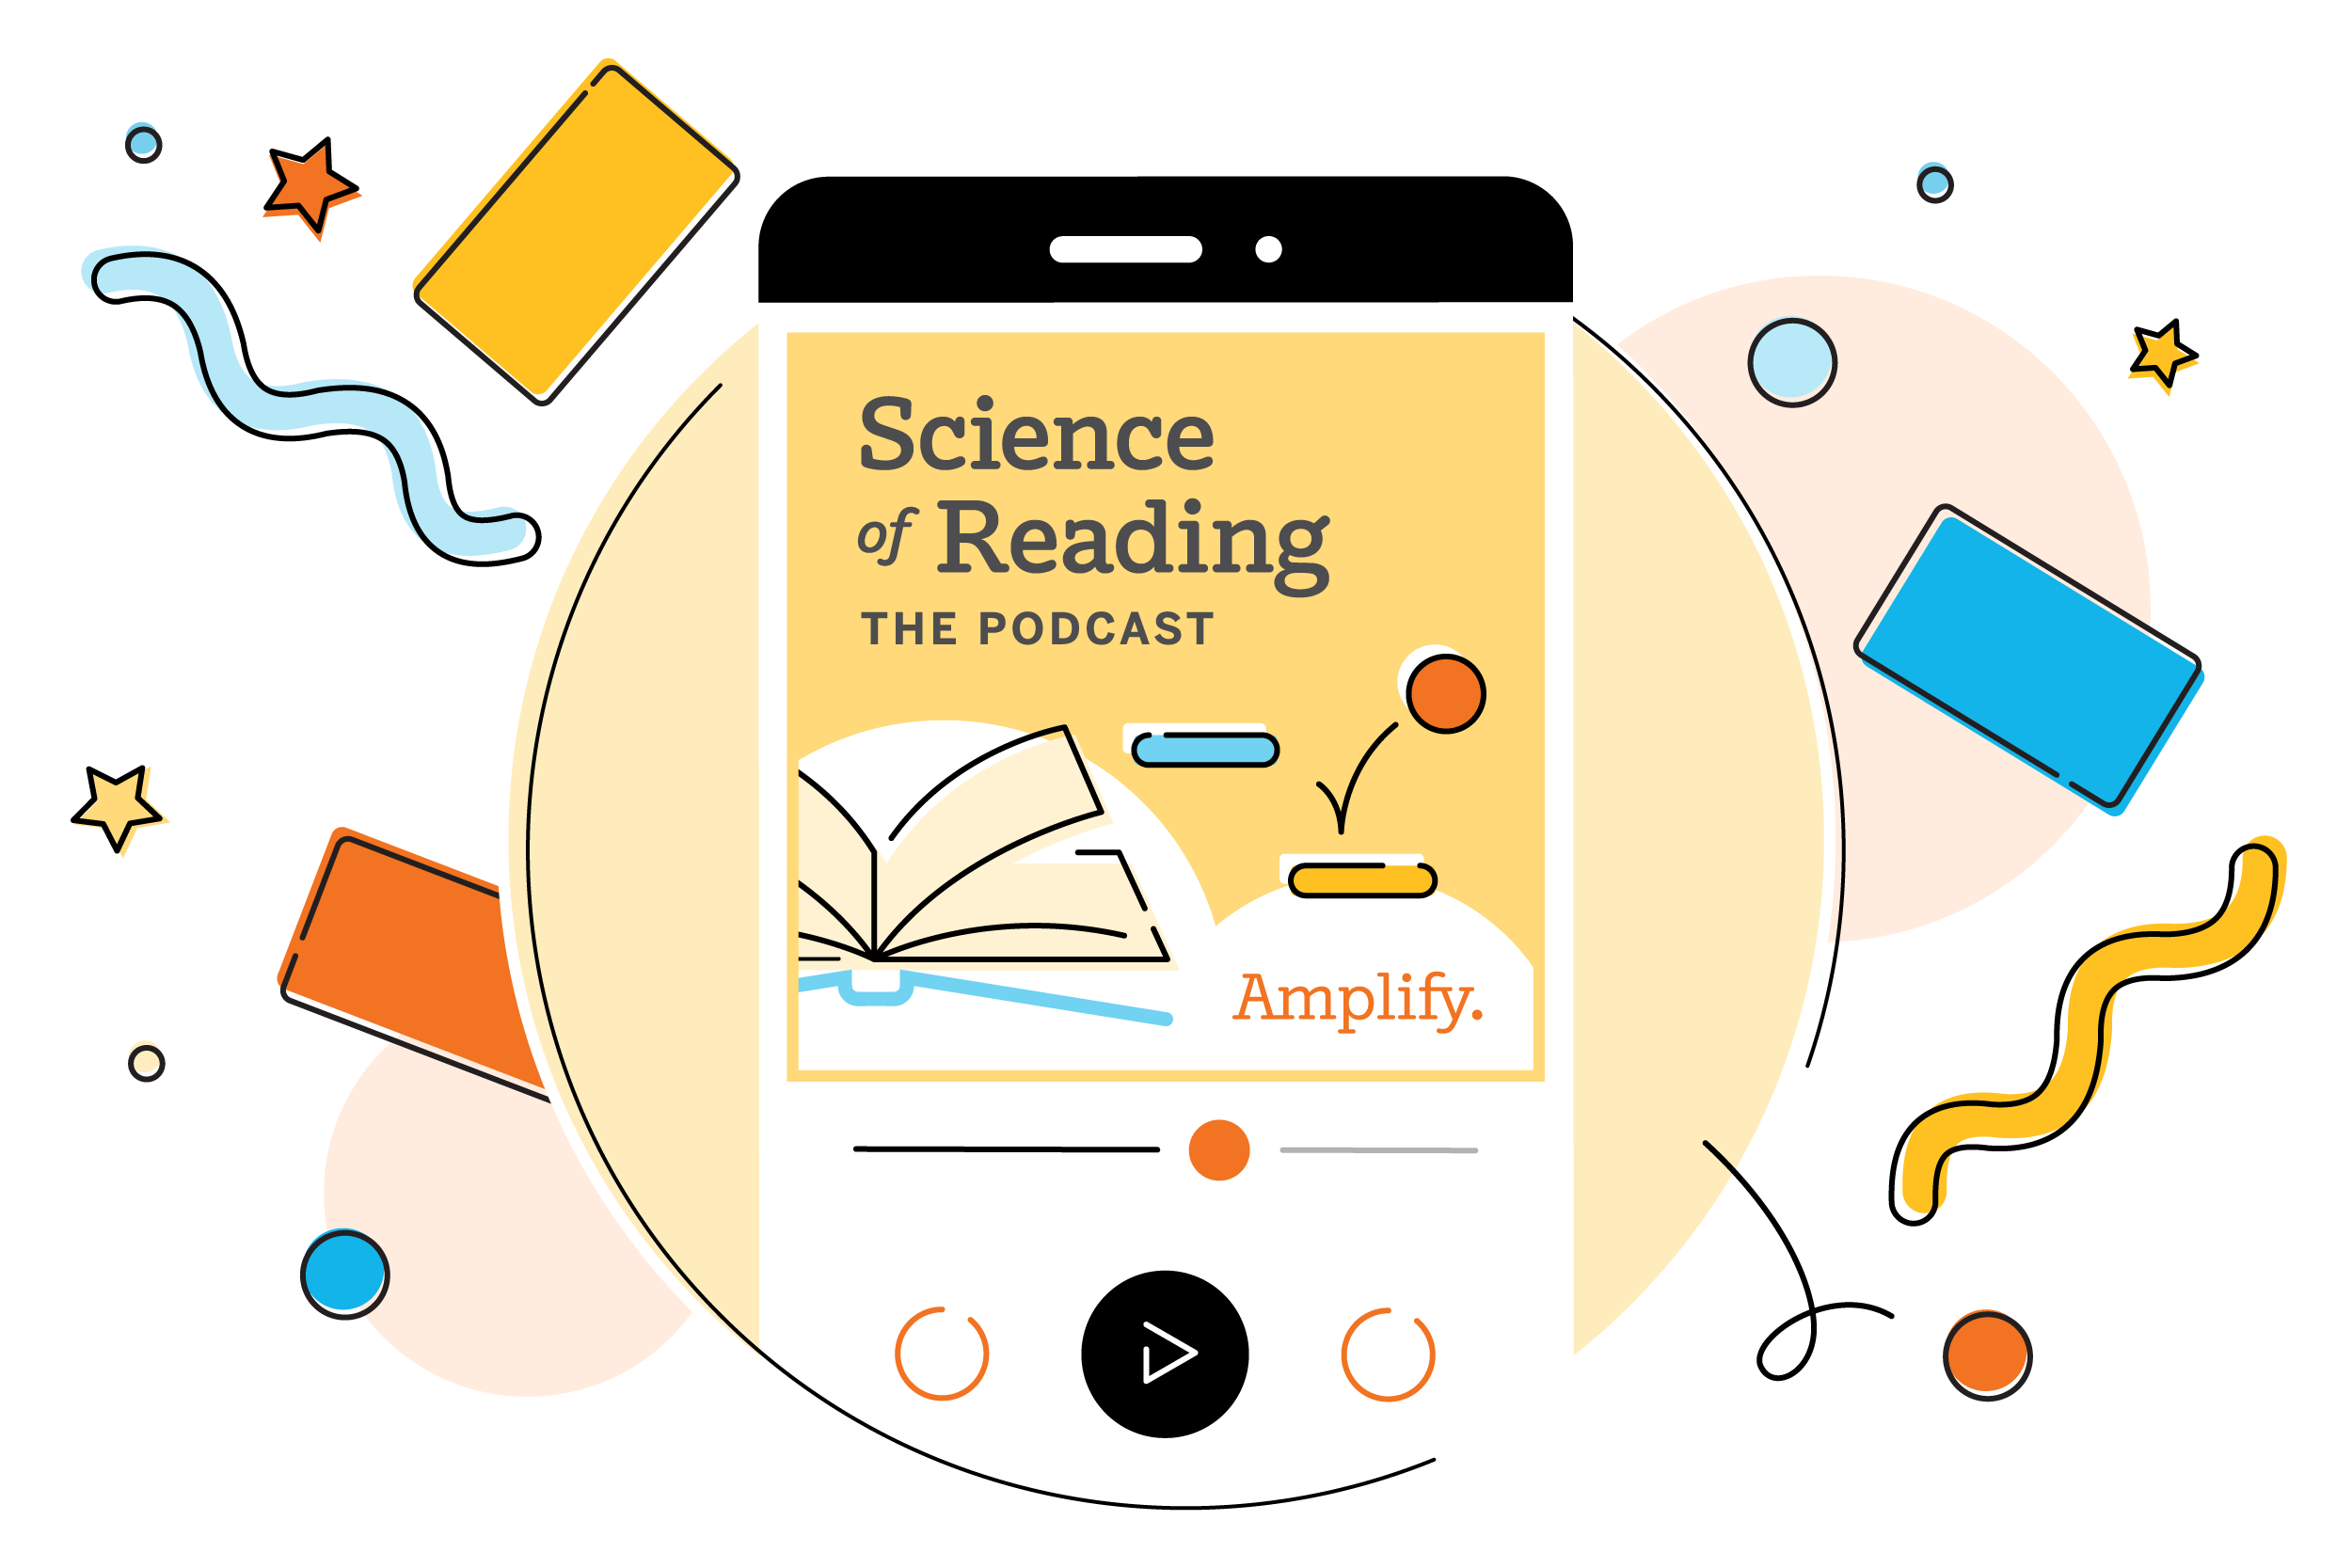 Science of Reading The Podcast celebration image